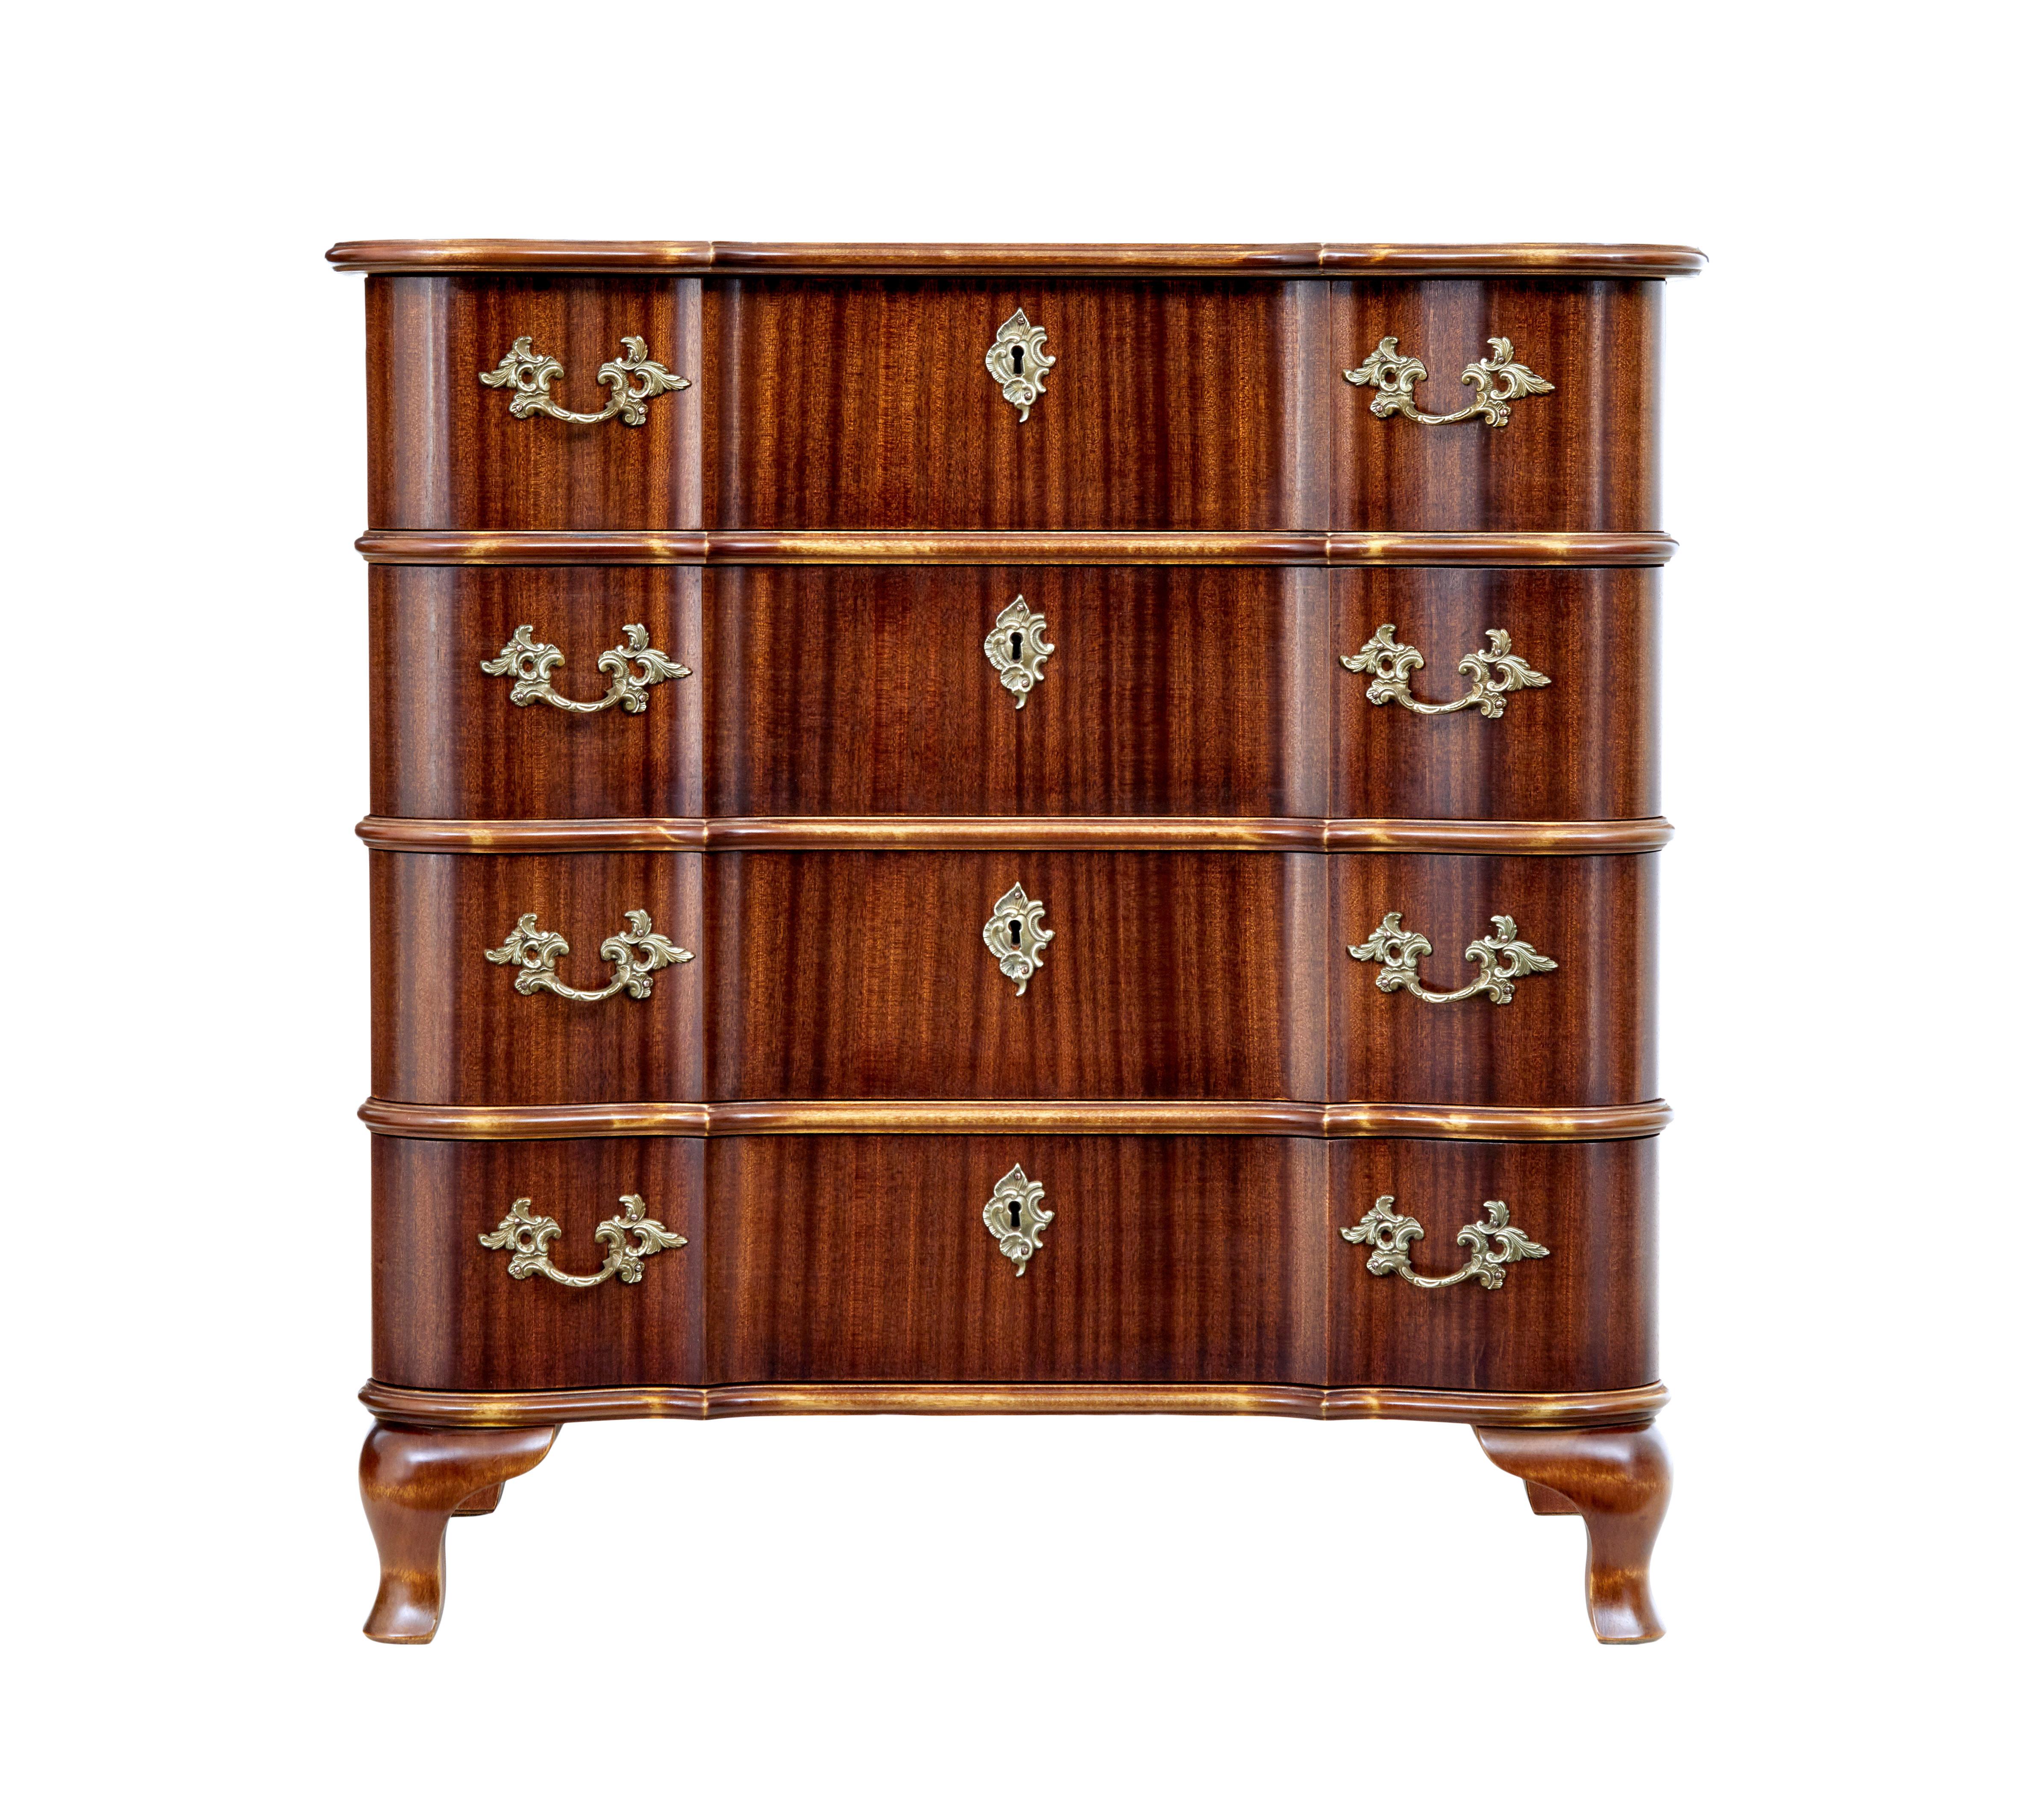 Scandinavian midcentury Baroque Revival chest of drawers circa 1950.

Good quality mahogany veneered chest of drawers, very much in the Baroque taste. Shaped top with 4 block fronted drawers below, each fitted with ornate handles and escutheon